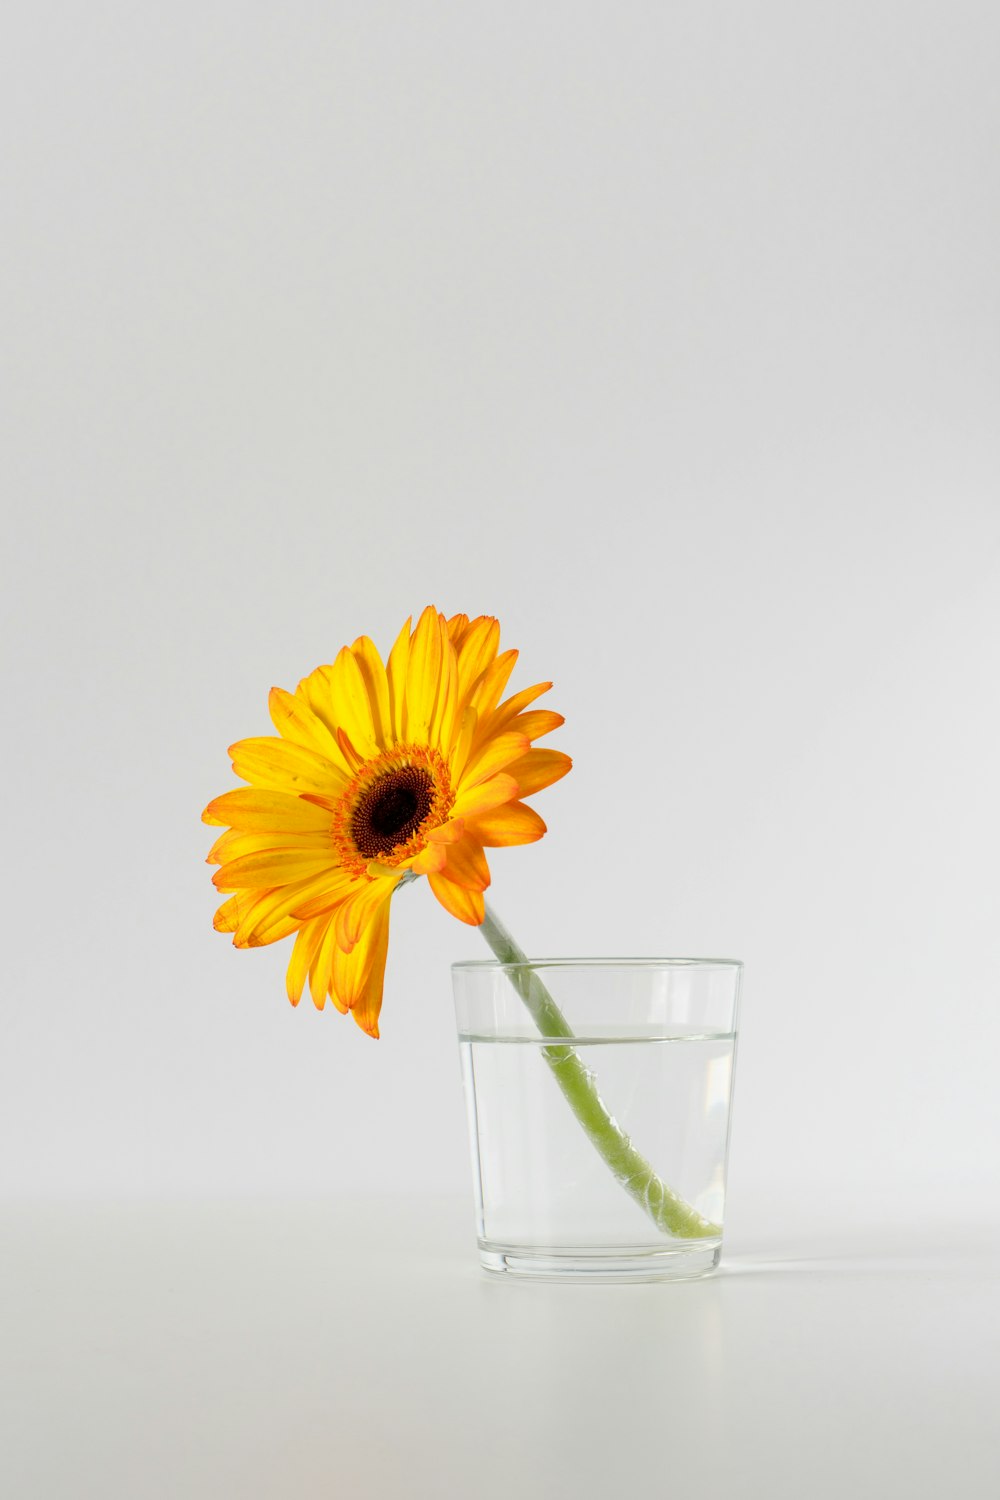 a single yellow flower in a glass of water